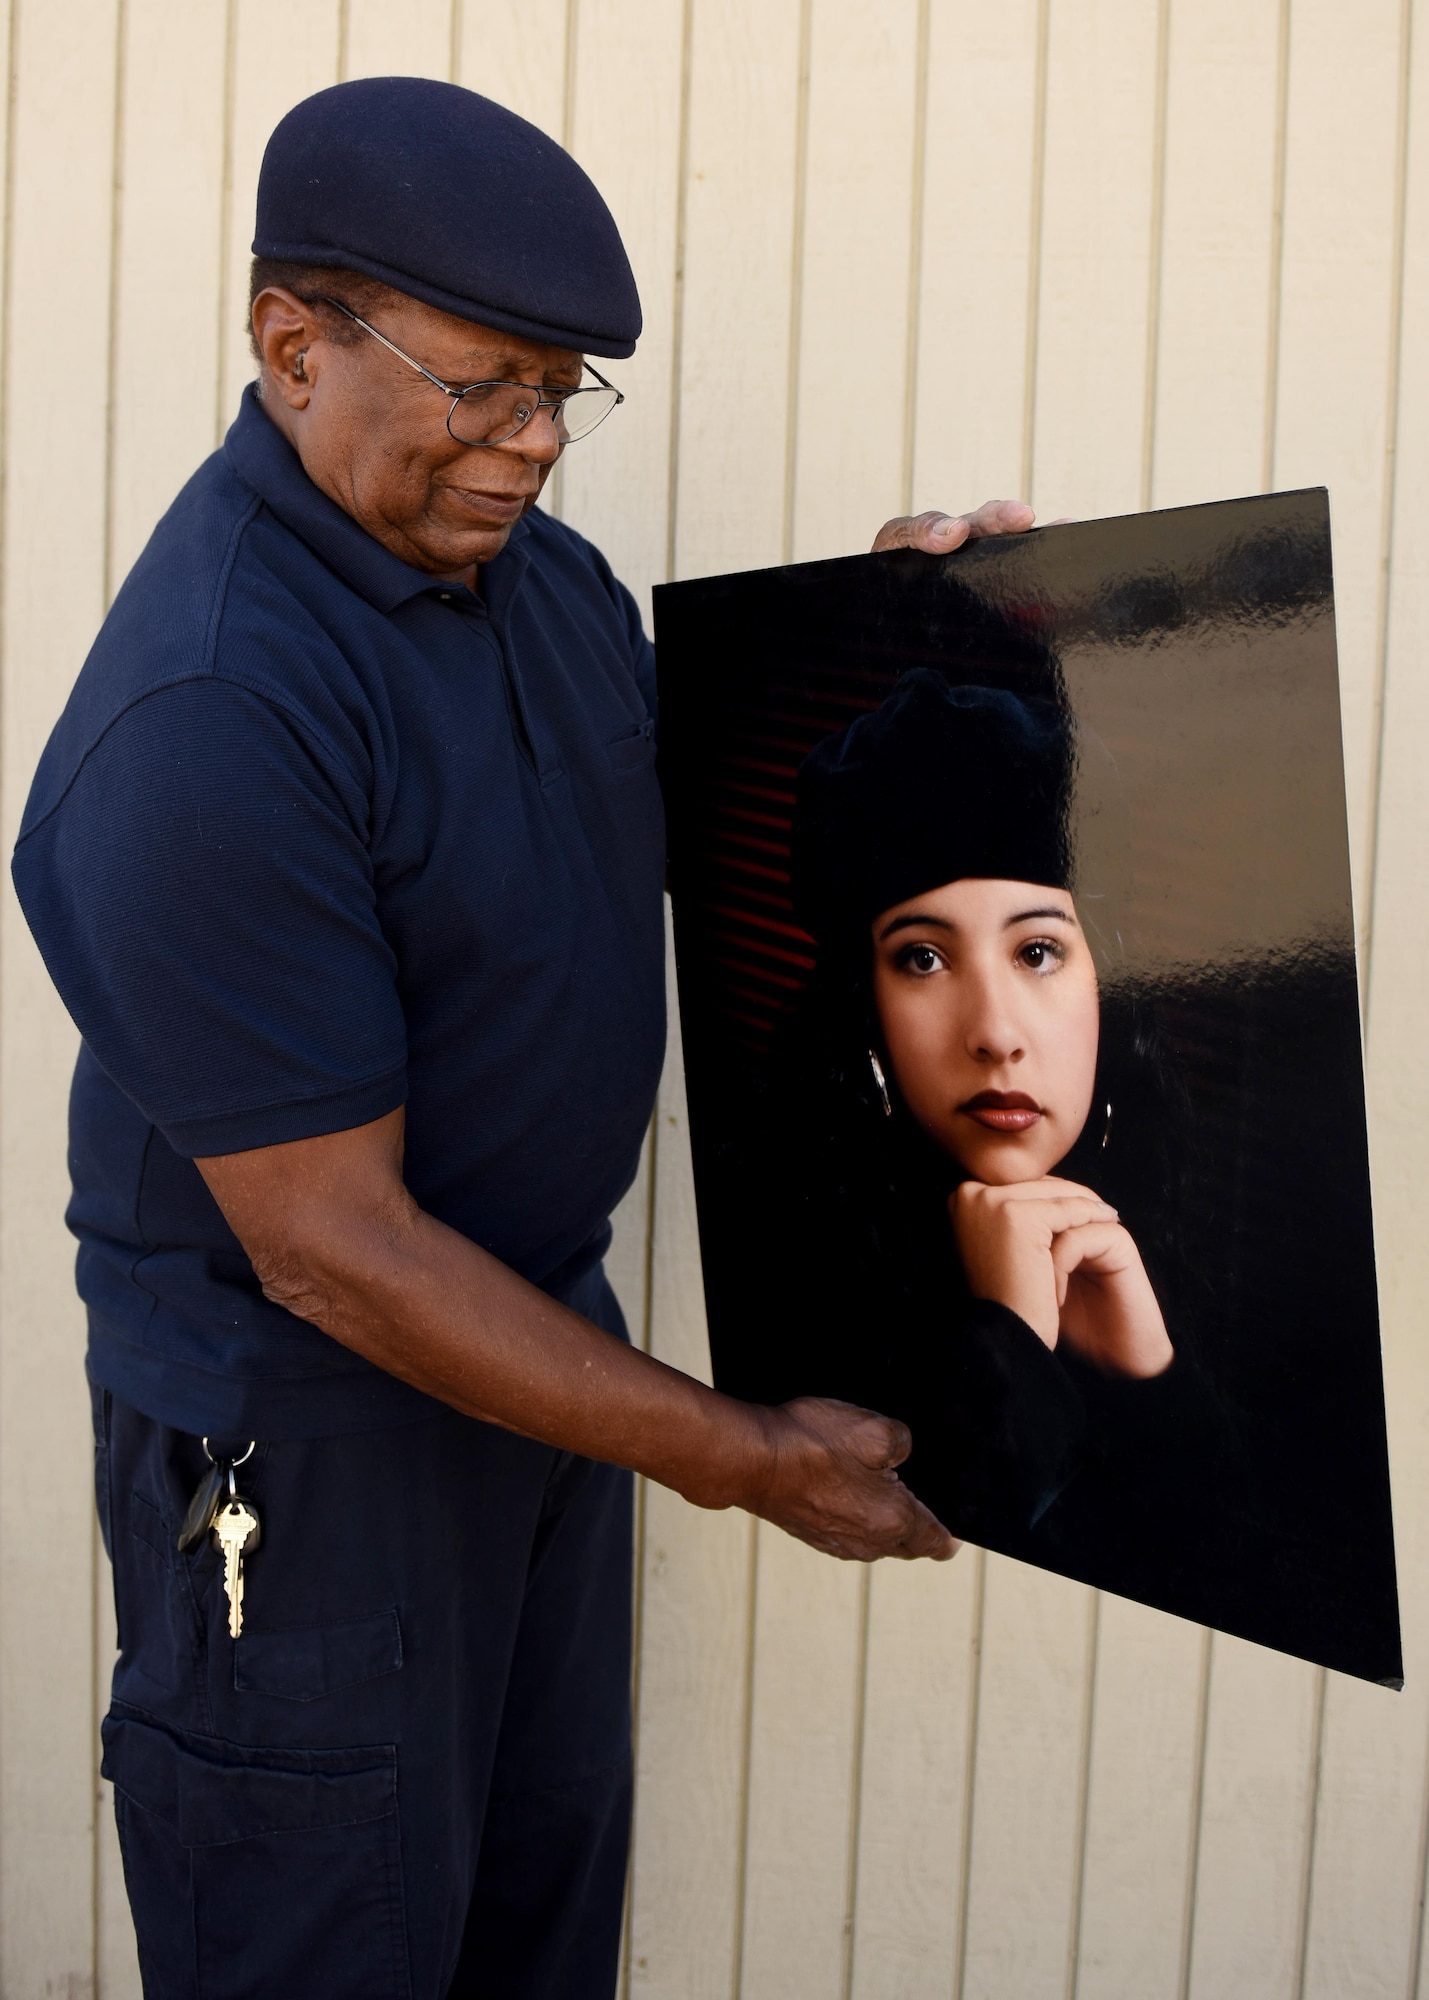 Retired U.S. Air Force Master Sgt. Clarence Rollins, ‘Rocky’, holds a portrait he photographed almost twenty years ago, Oct. 10, 2017, Vandenberg Air Force Base, Calif. Rocky owned a photography studio for 45 years, where he photographed everything from portraits, weddings, dances, and copy and restoration. (U.S. Air Force photo by Senior Airman Kyla Gifford/Released)